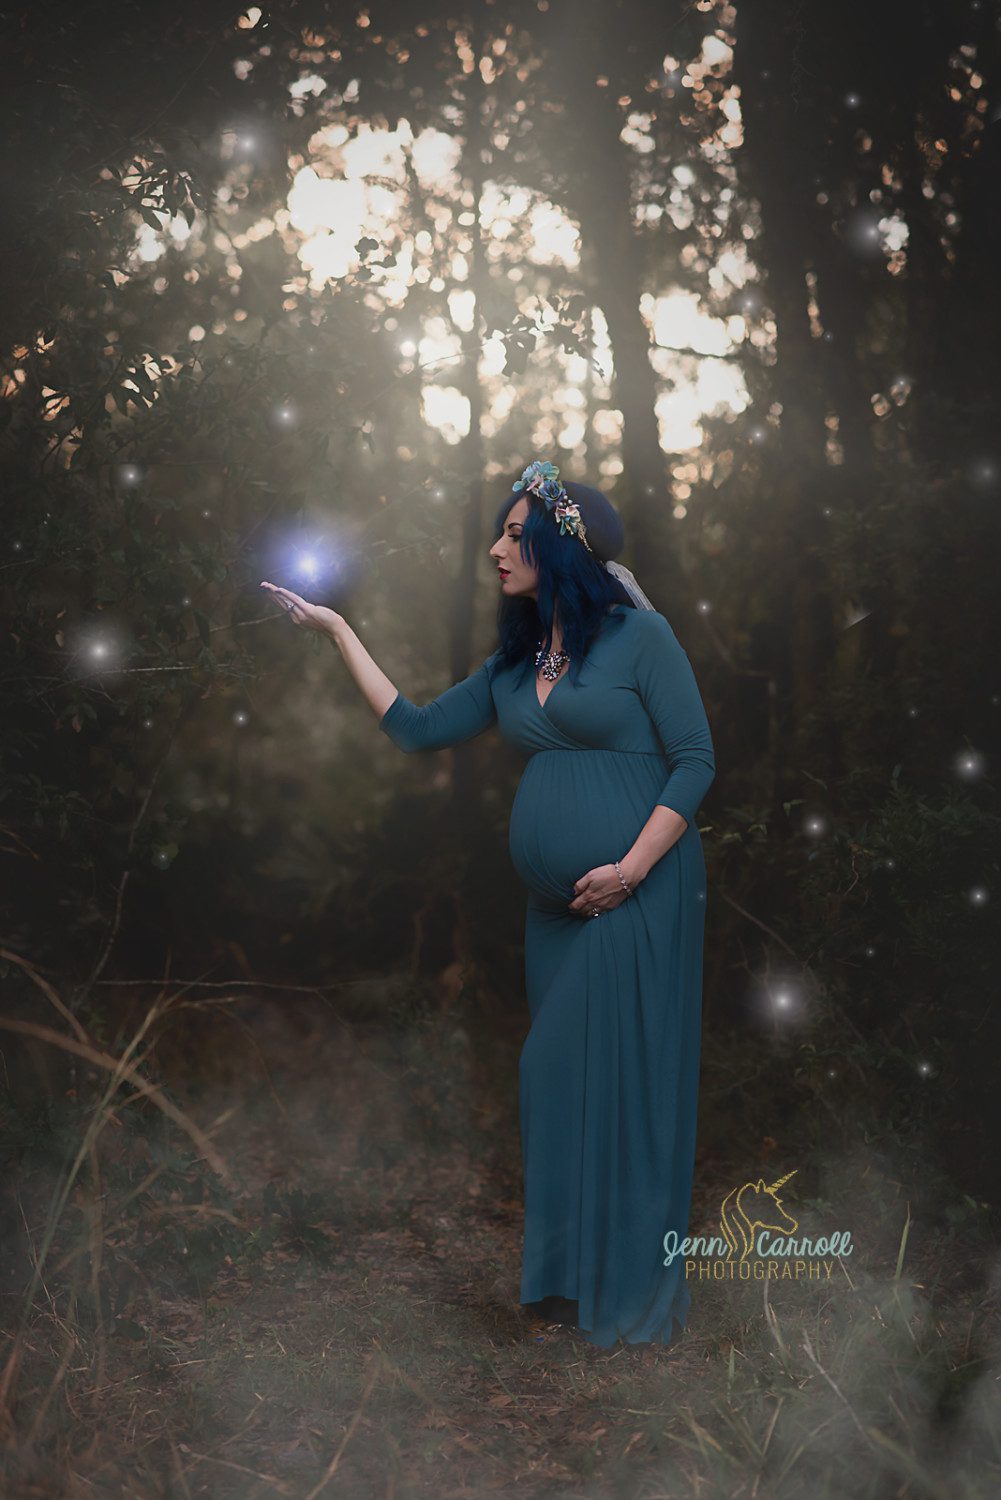 jenn carroll photography, jenn carroll, session, maternity, tampa child photographer, tampa, zephyrhills, wesley chapel photographer, florida photographer, zephyrhills photographer, maternity session, bump to baby, pregnancy announcement, maternity photographer, gowns, floral crowns, game of thrones, fairies, fae, woodland, woods, magic, magik, unicorn photographer, unicorn magic, photoshop, nikon, nikon d750